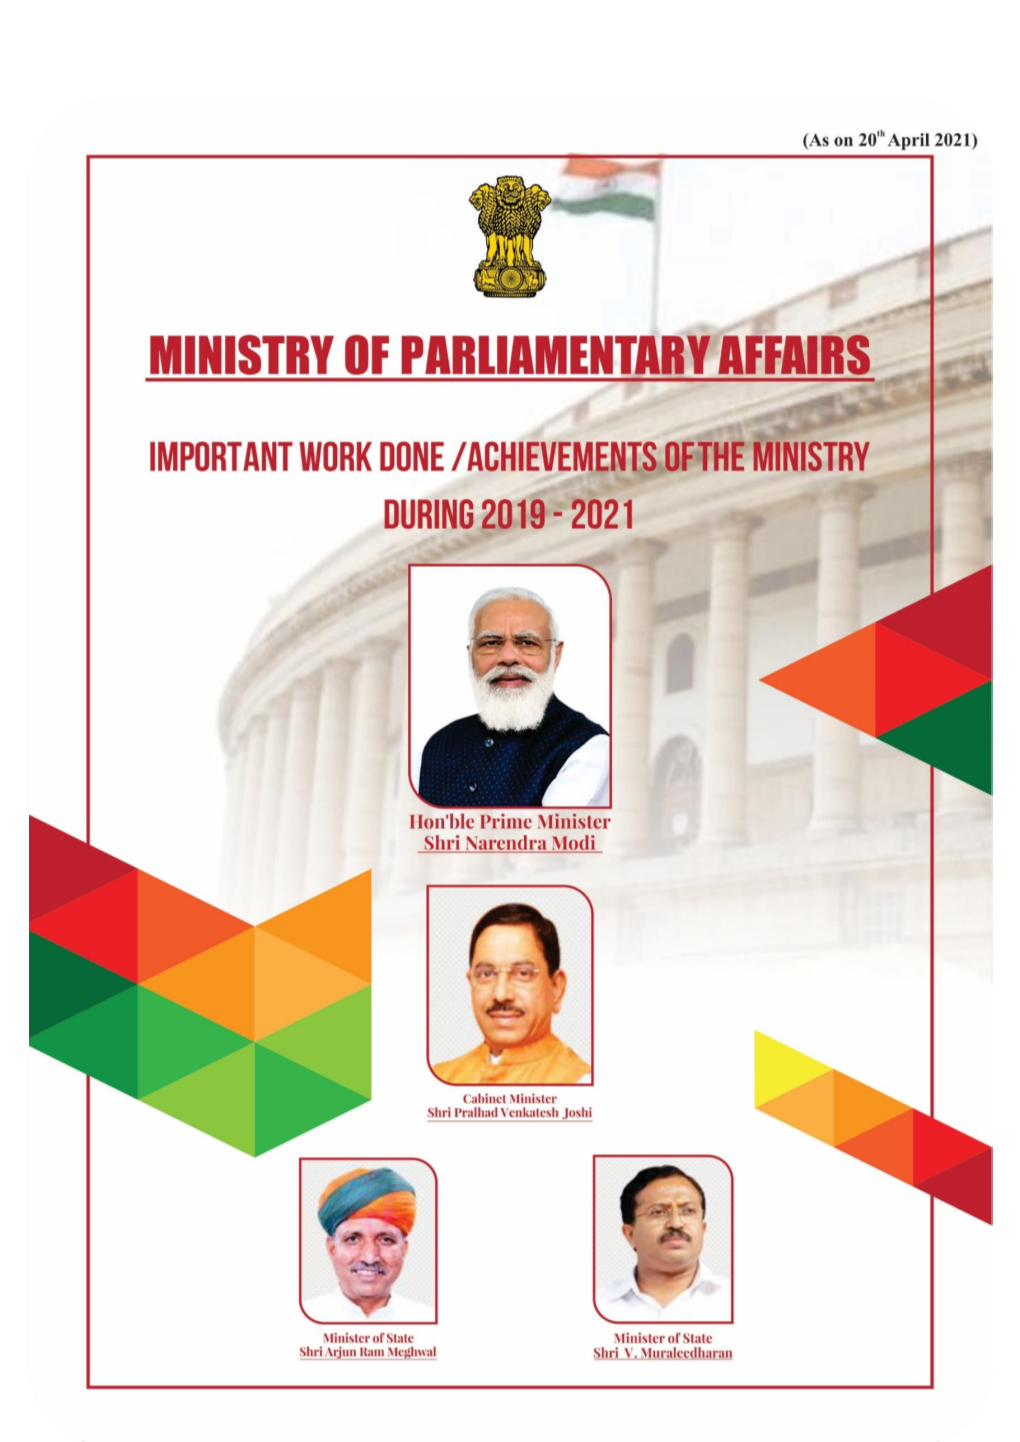 Important Work Done / Achievements of the Ministry During 2019-2021